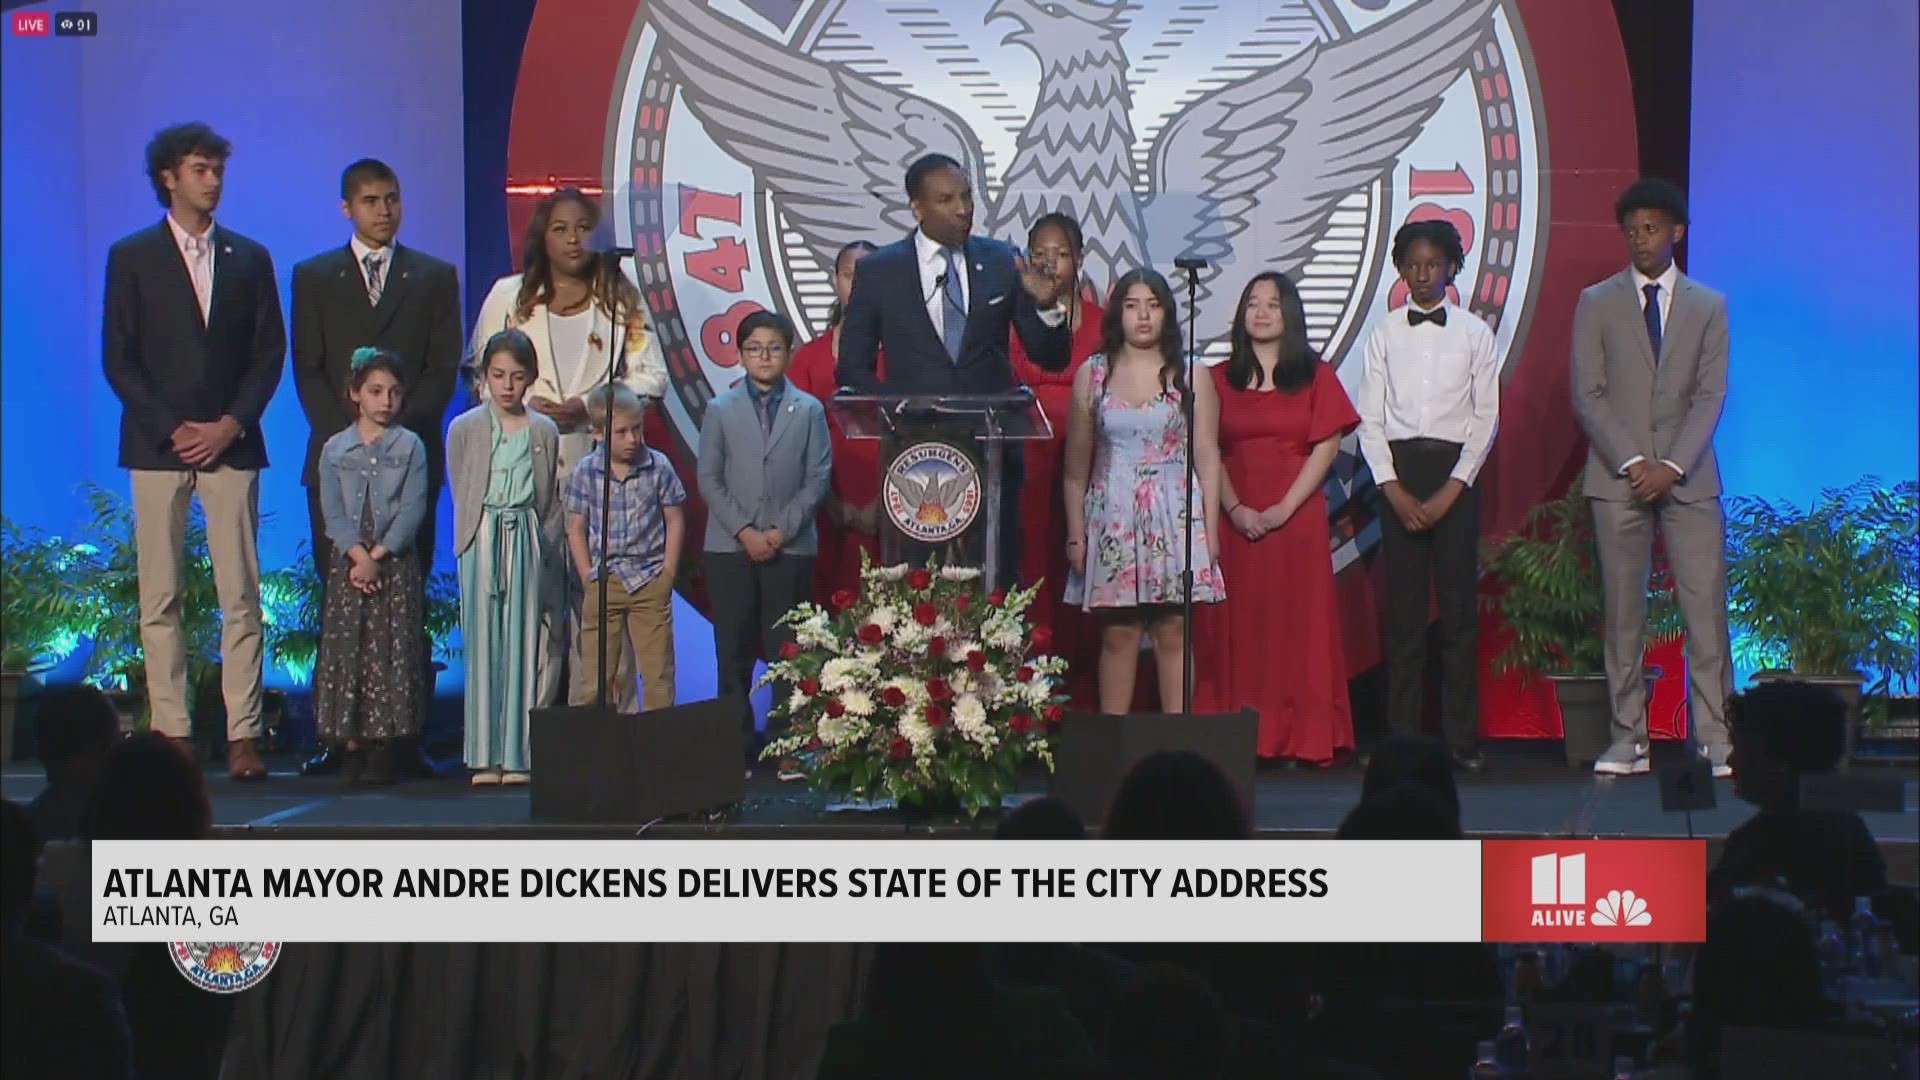 In his speech, Mayor Dickens stressed he wanted to make the city "the best place to raise a child."